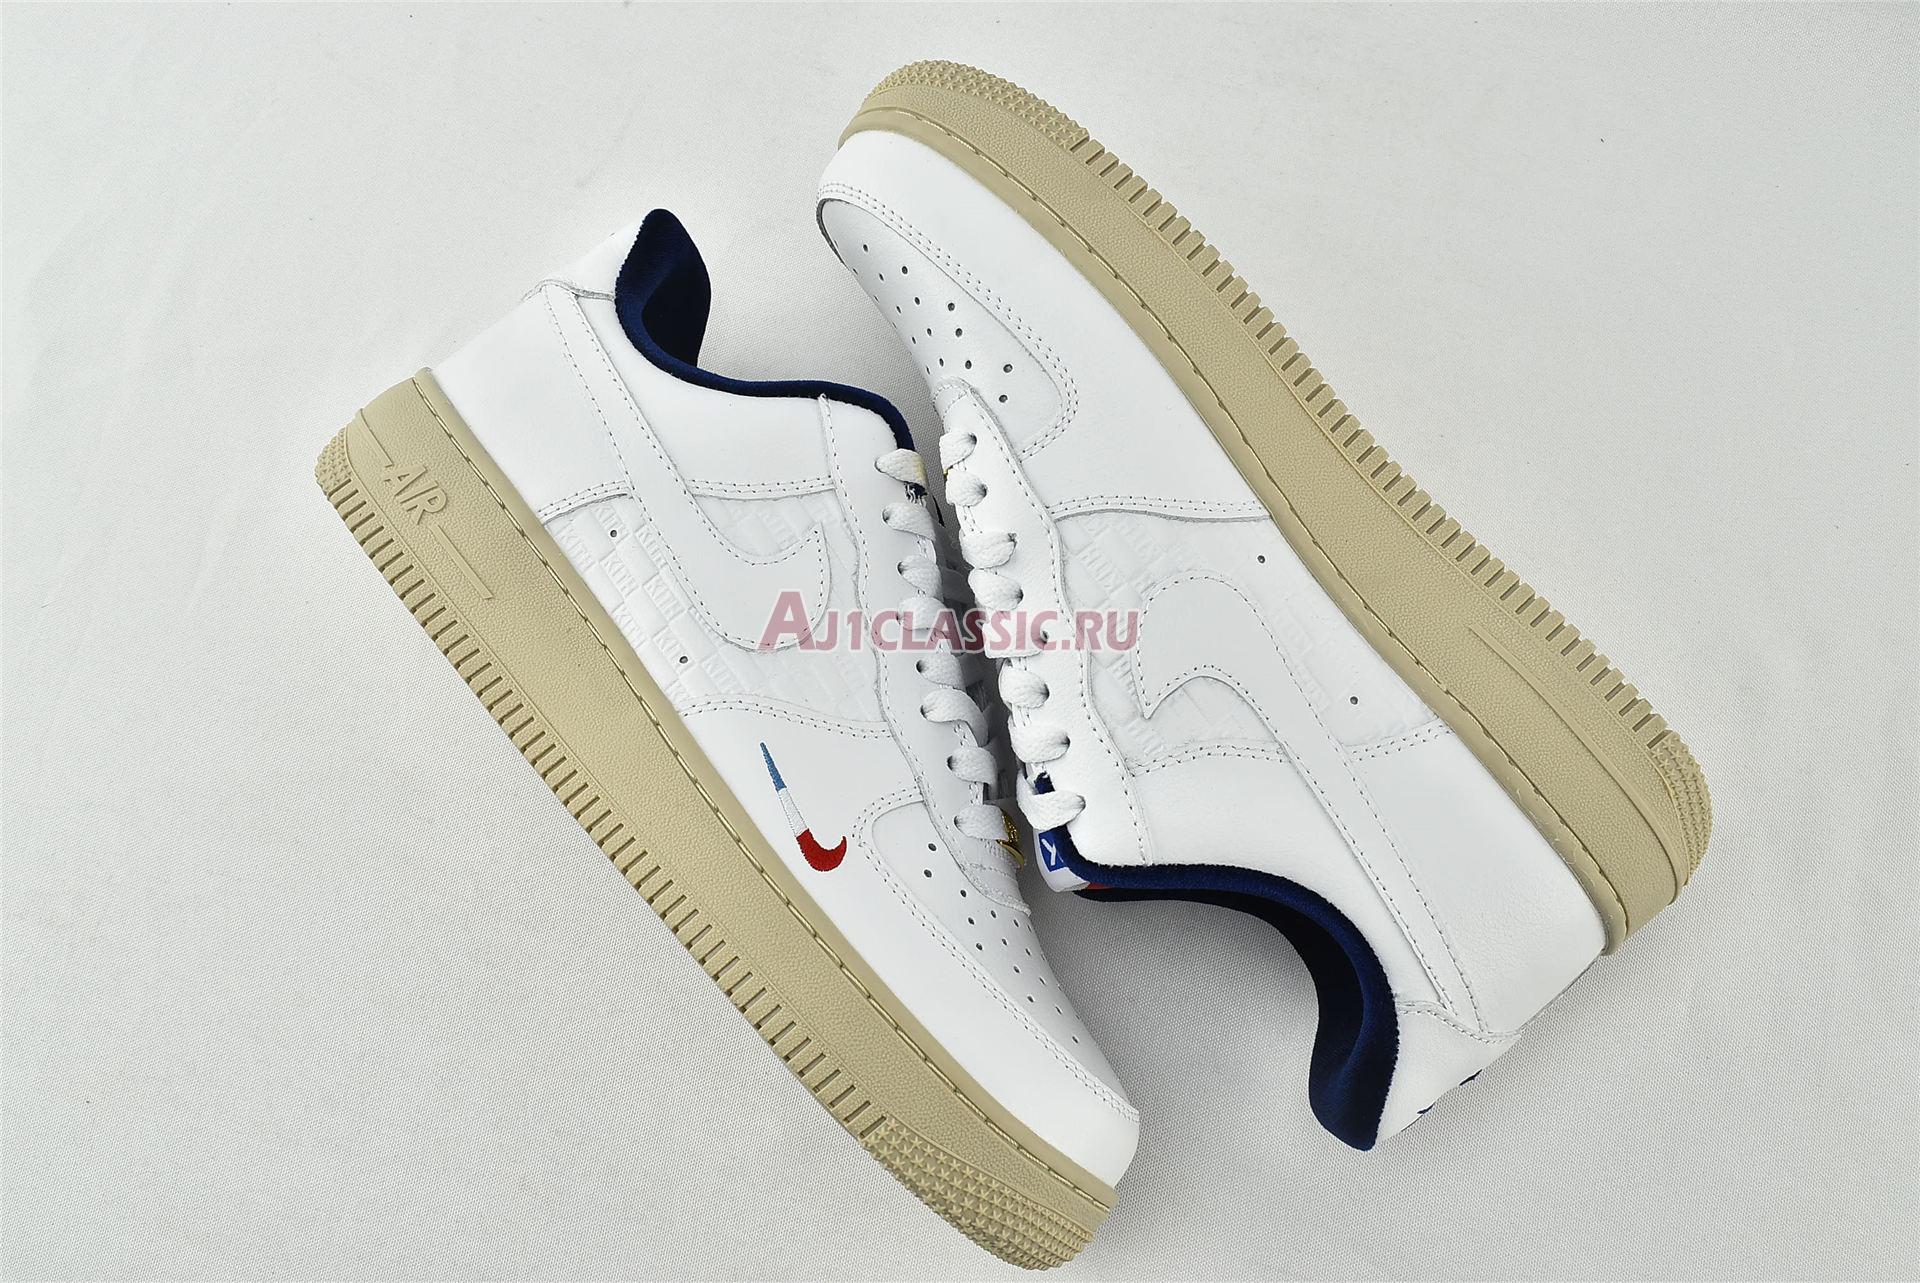 Kith x Nike Air Force 1 Low "France" CZ7927-100